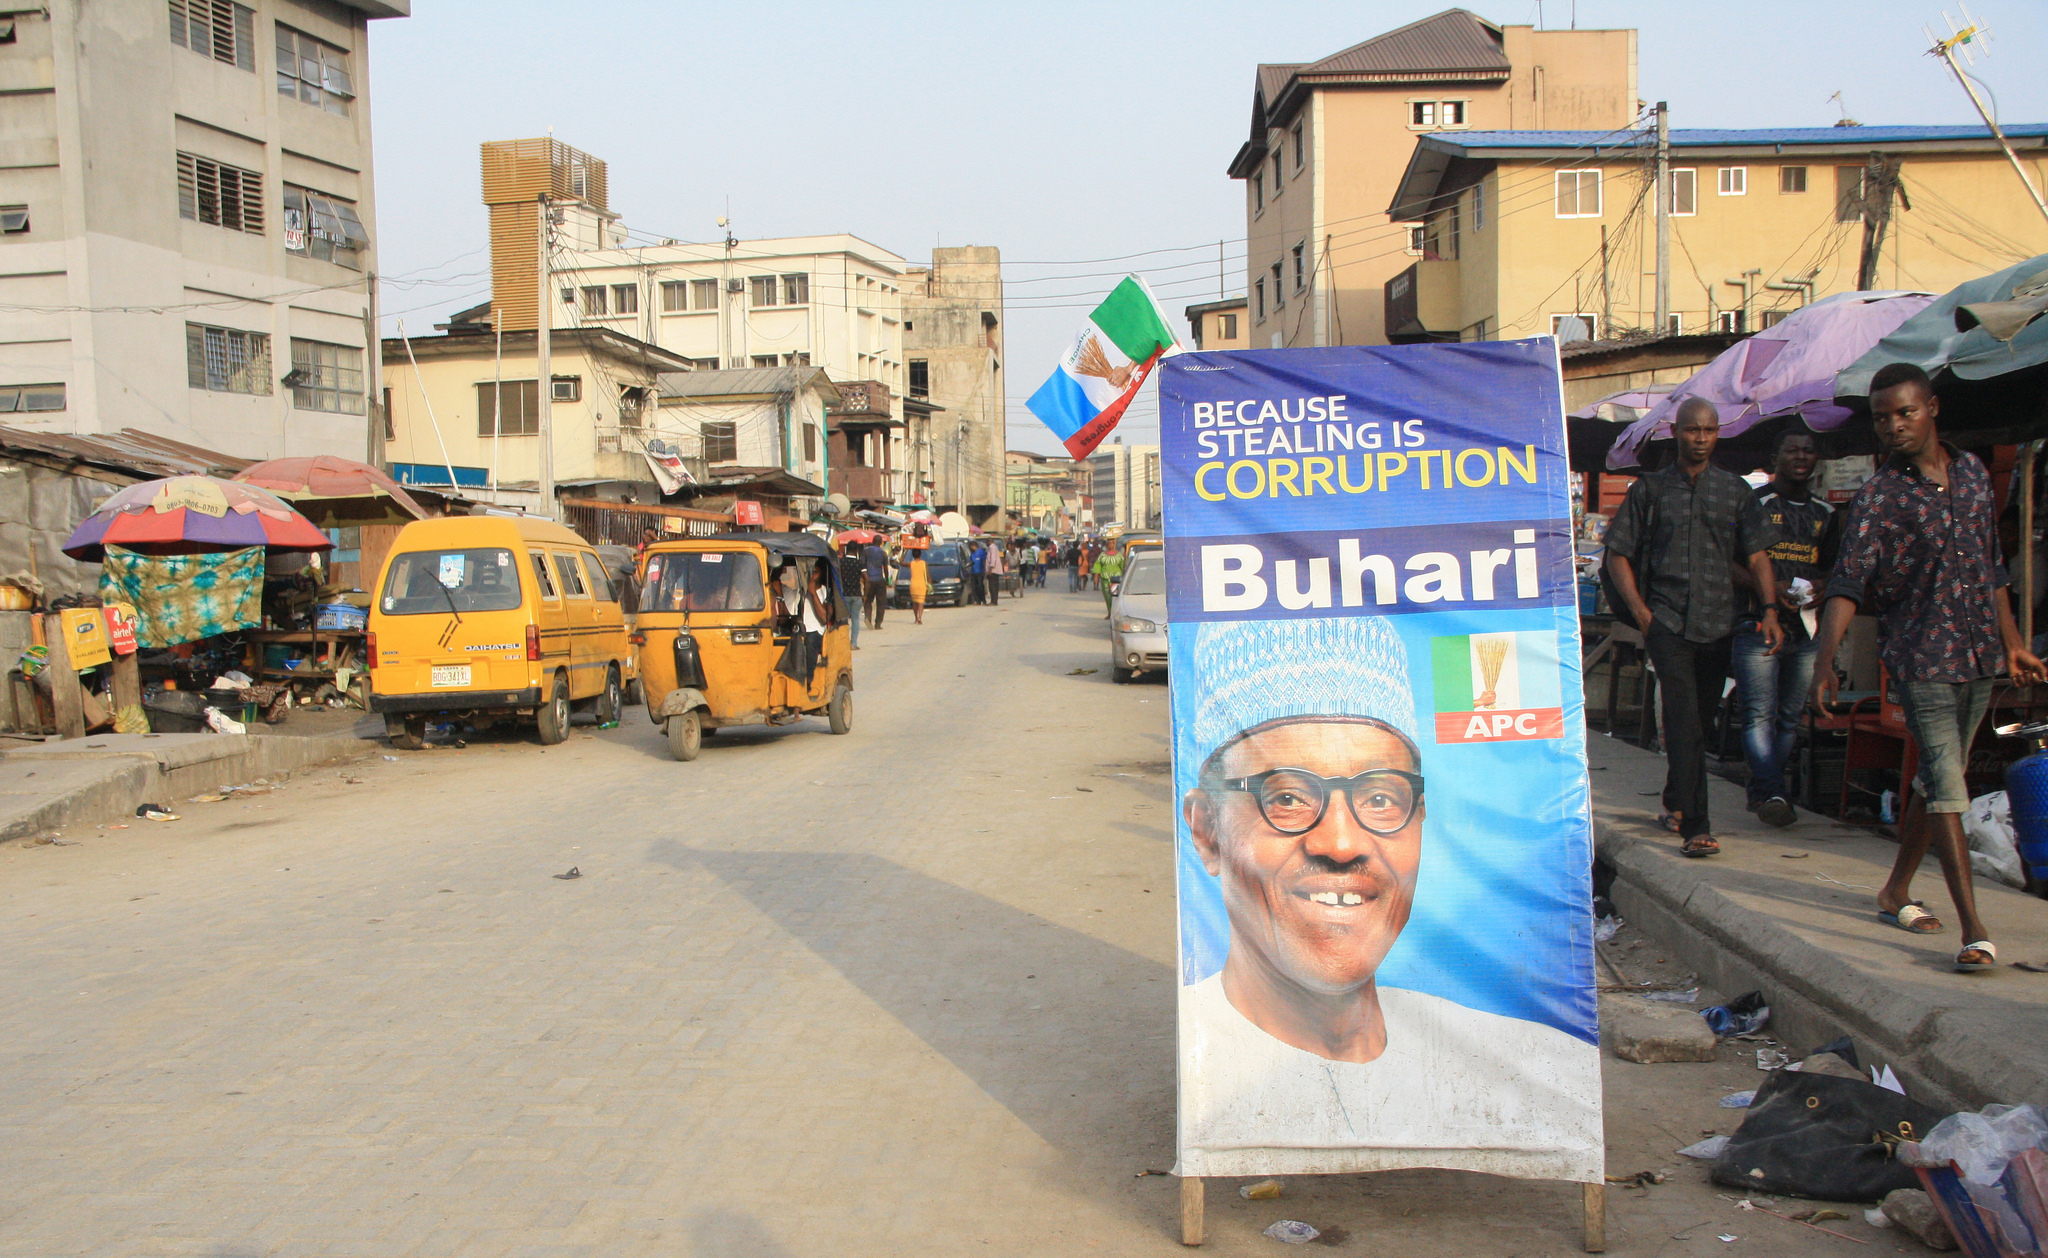 Nigeria: President elect promises change in first 100 days